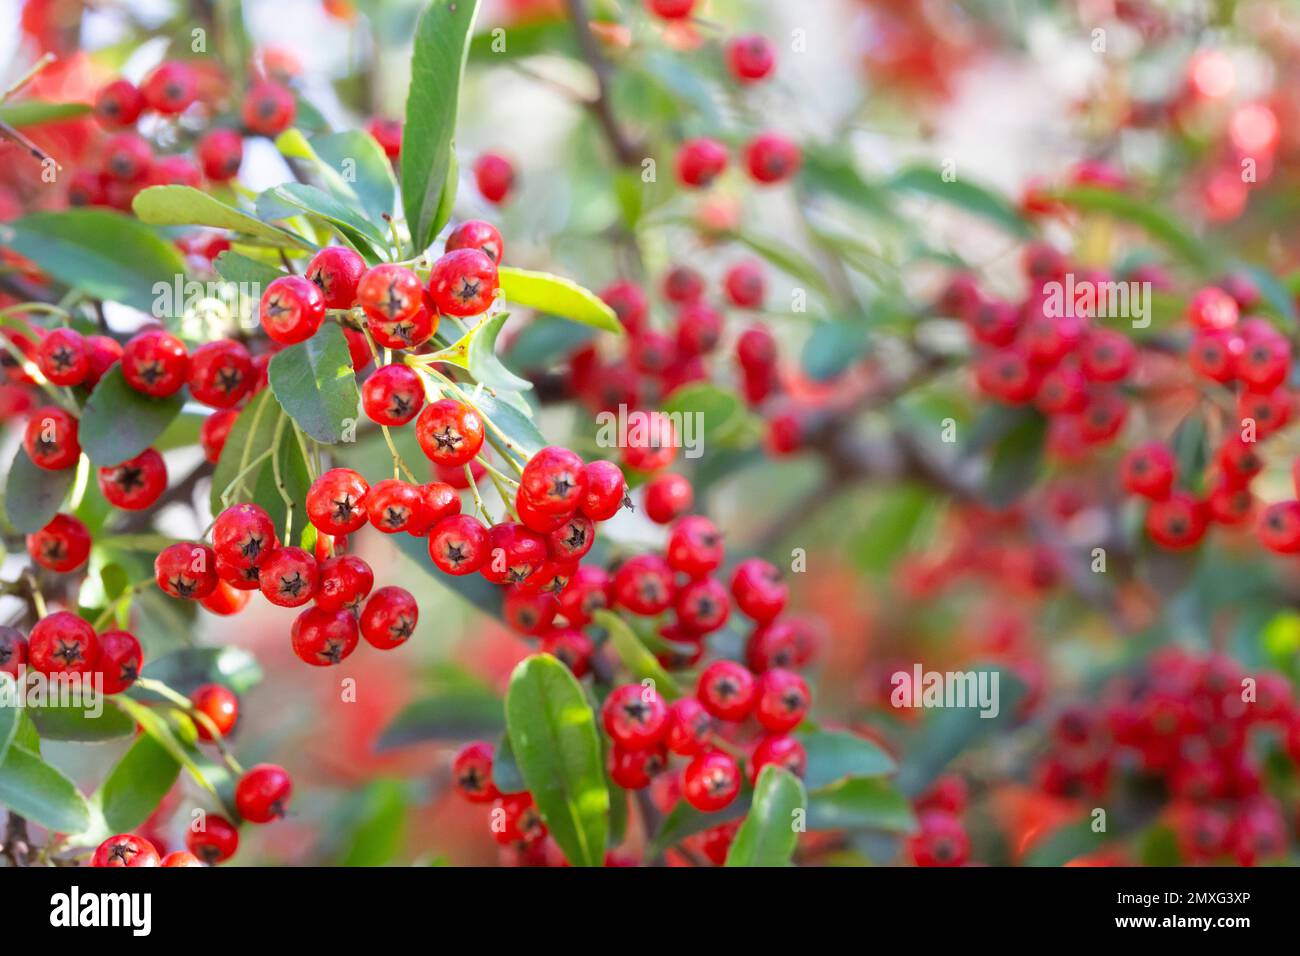 Bokeh background of A Brilliant Red Chokeberry Aronia arbutifolia bursting with red berries. Stock Photo